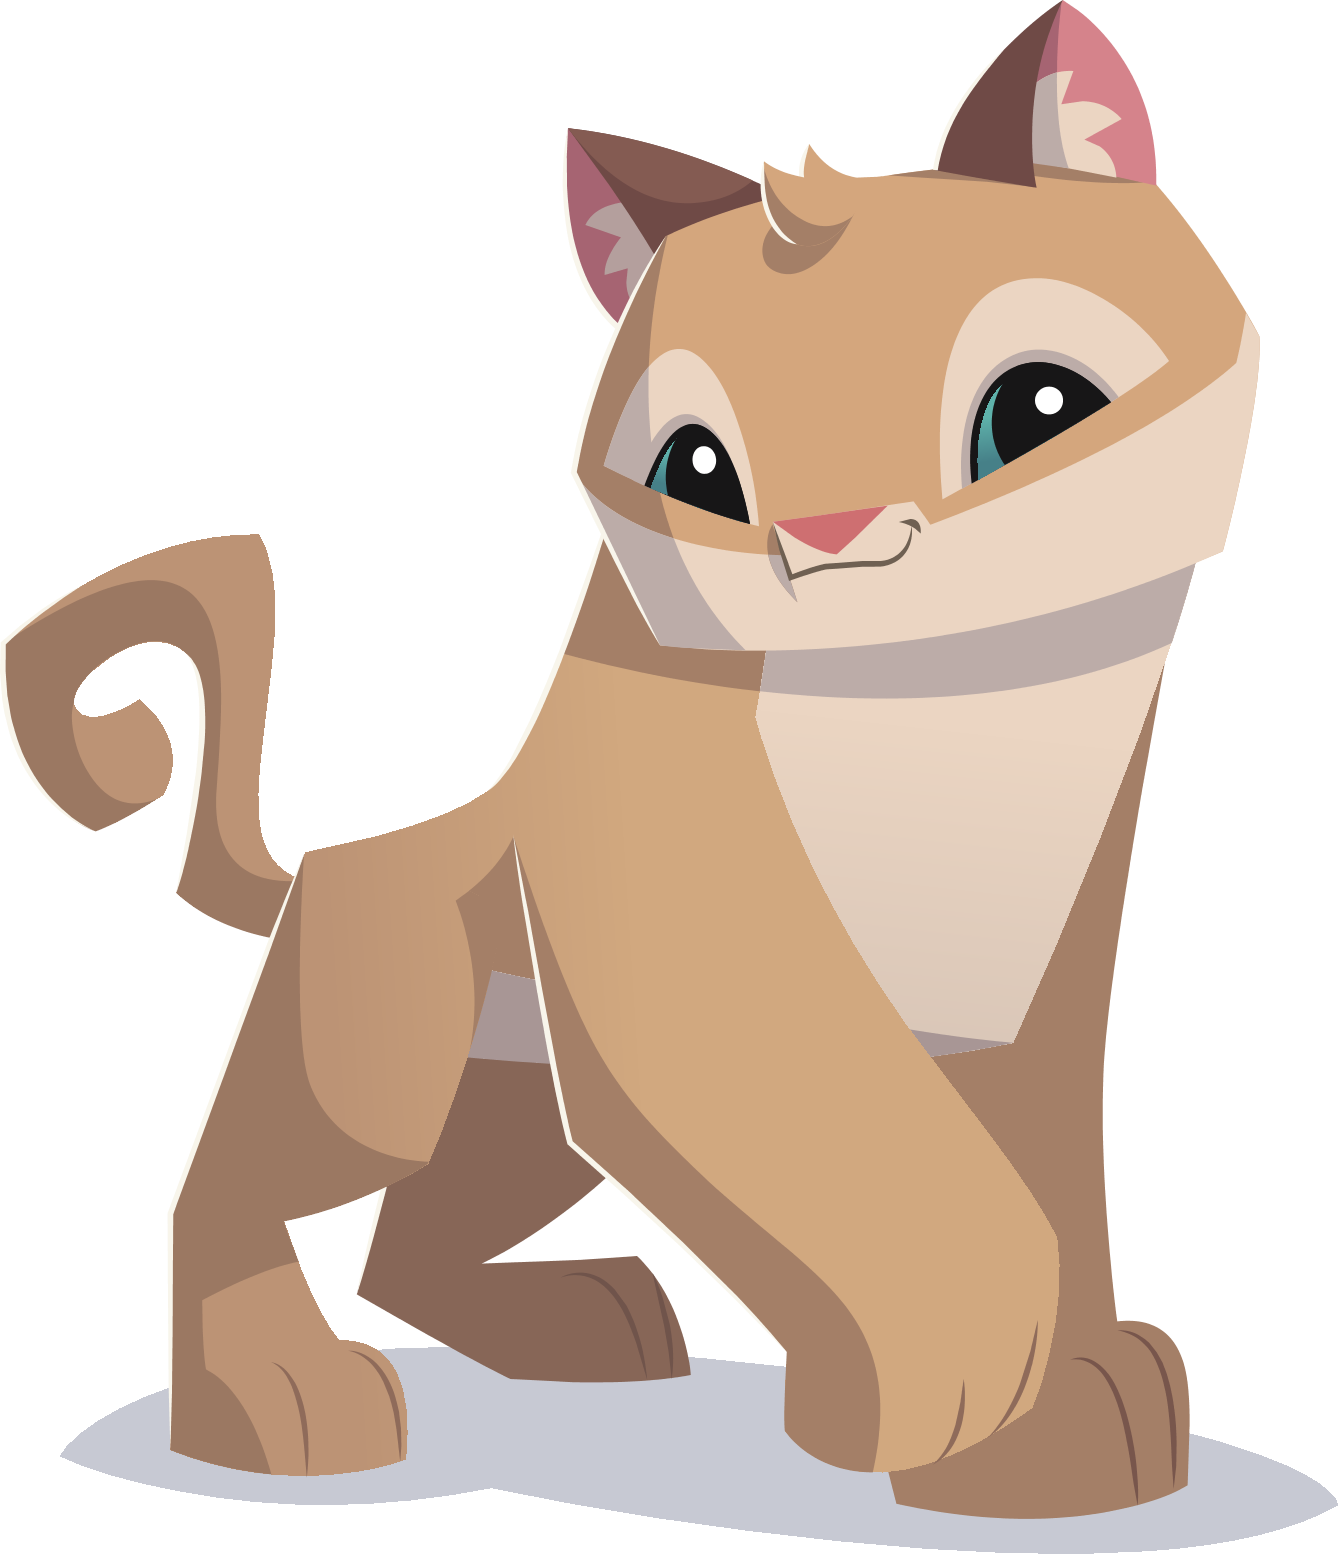 Download Cougar clipart cata, Cougar cata Transparent FREE for download on WebStockReview 2021